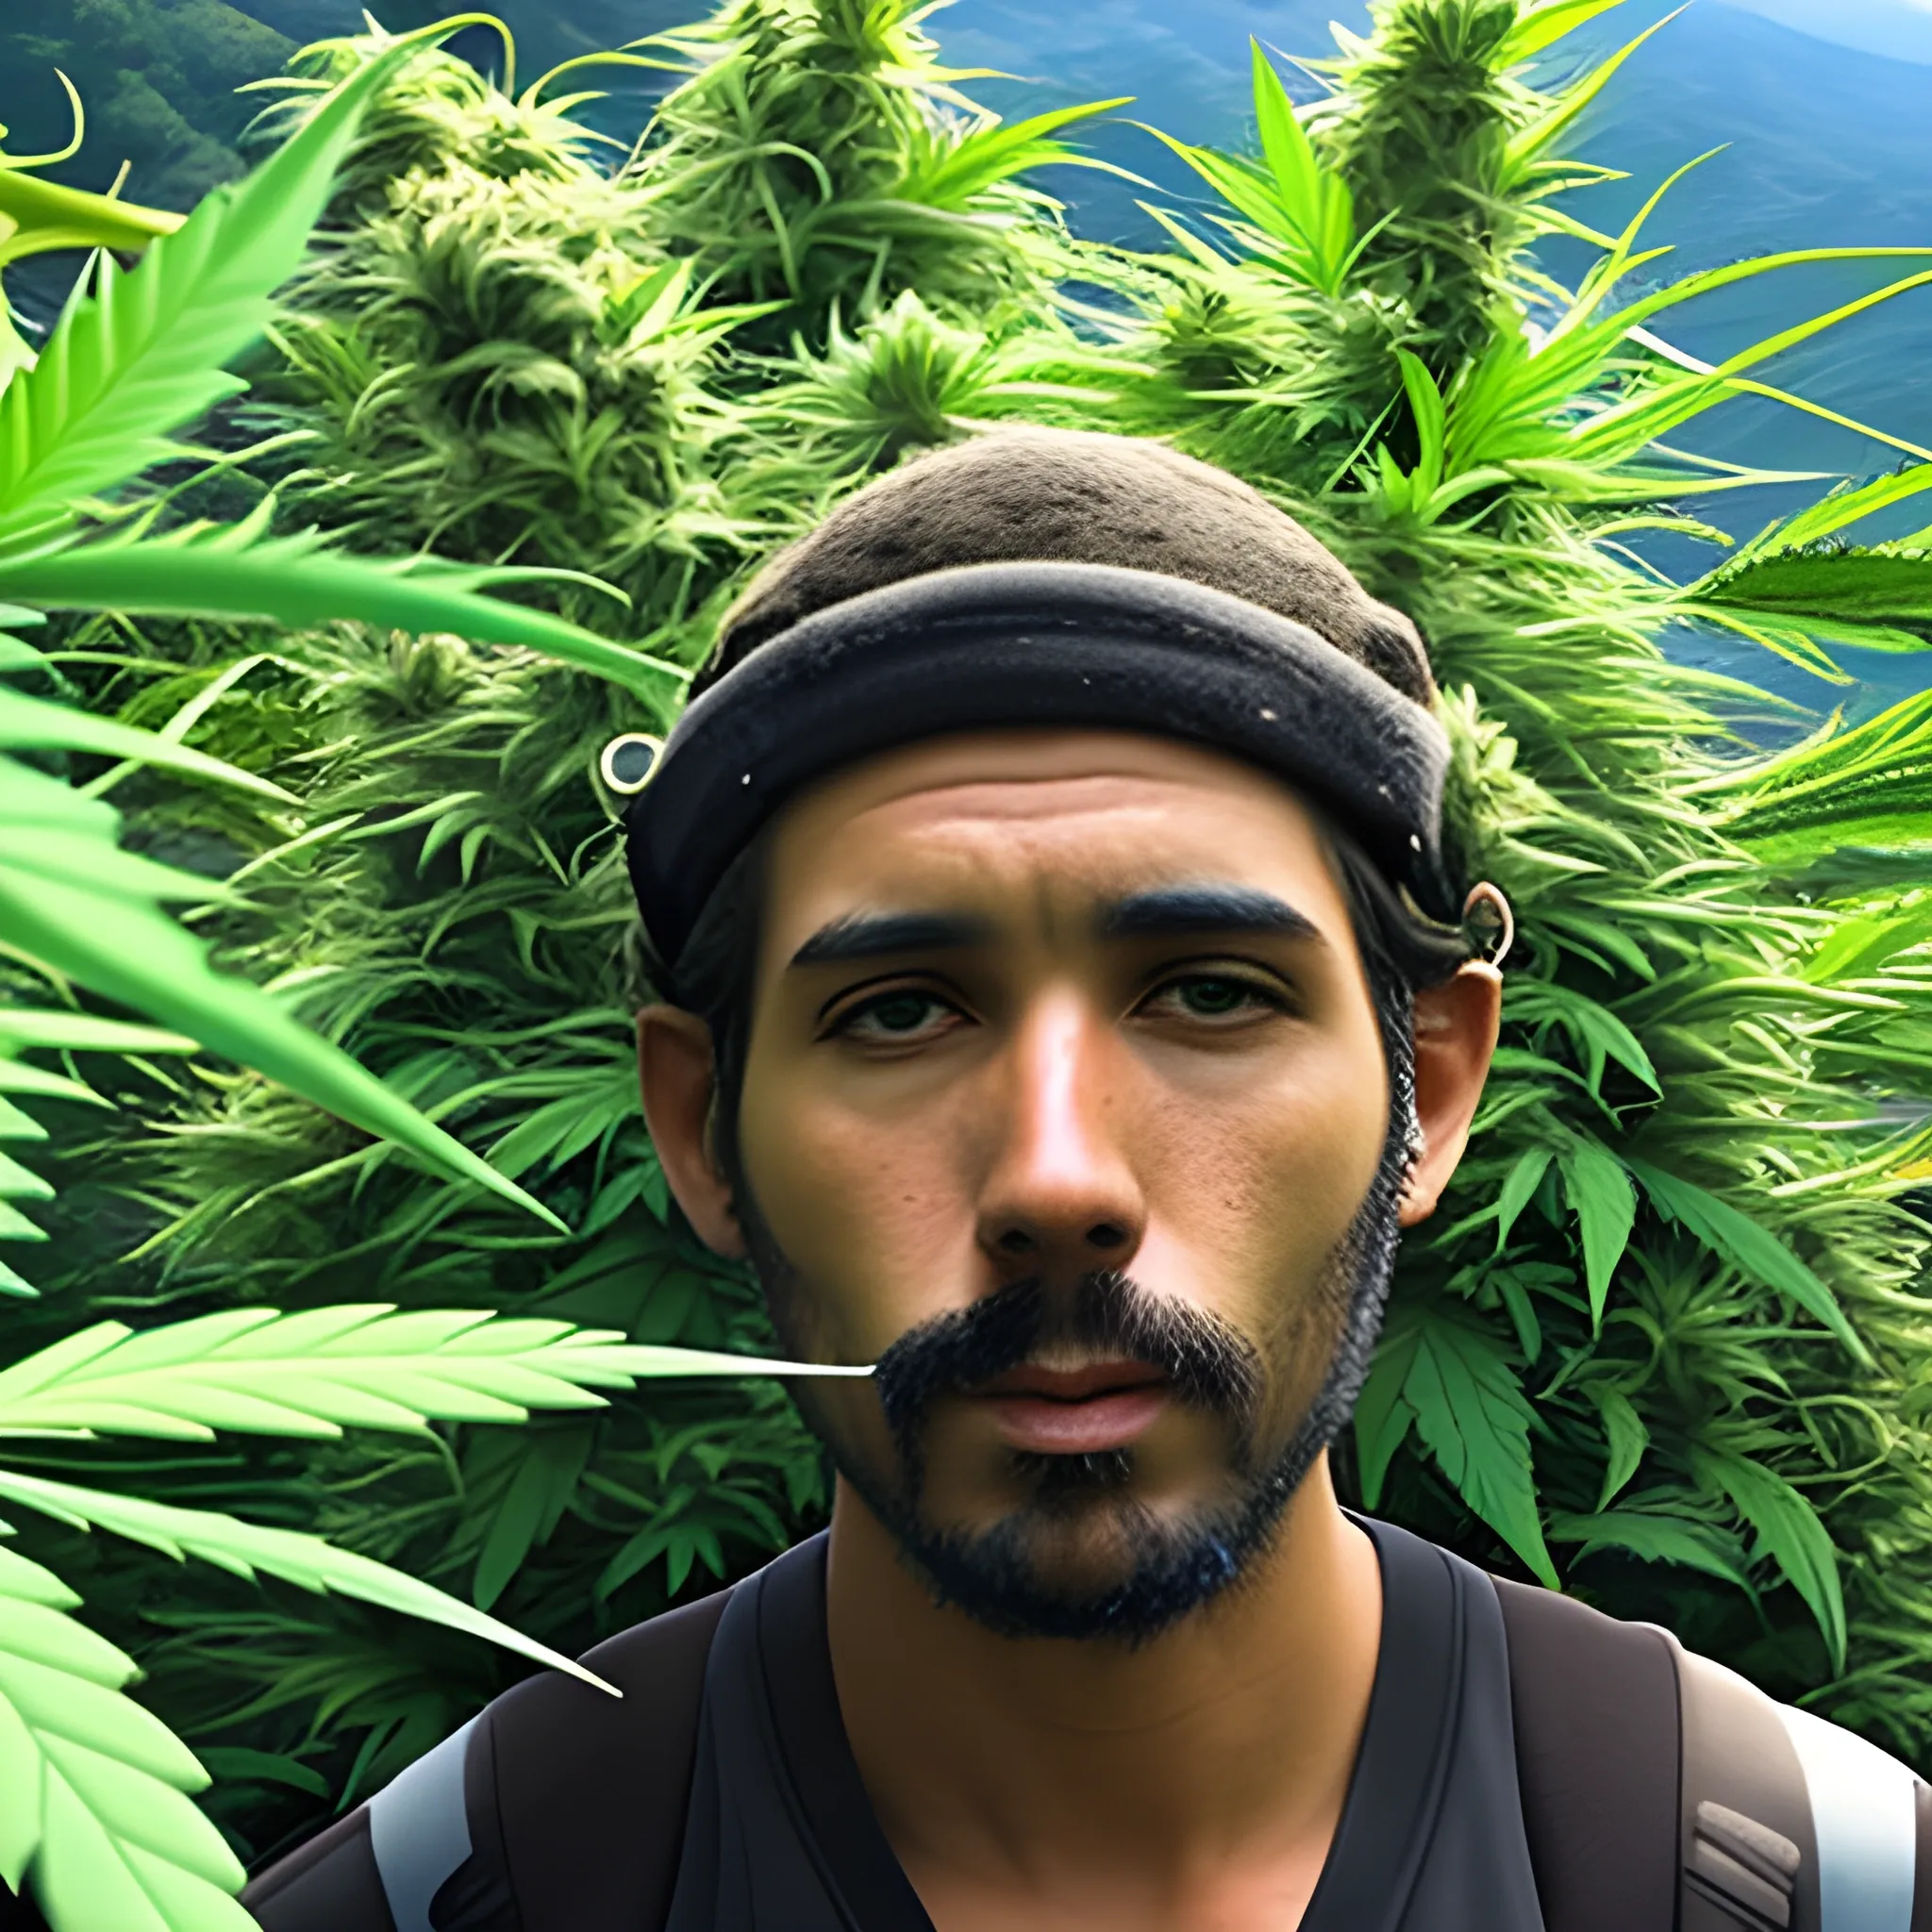 cannabis, Costa Rica, nature, Volcan, people

